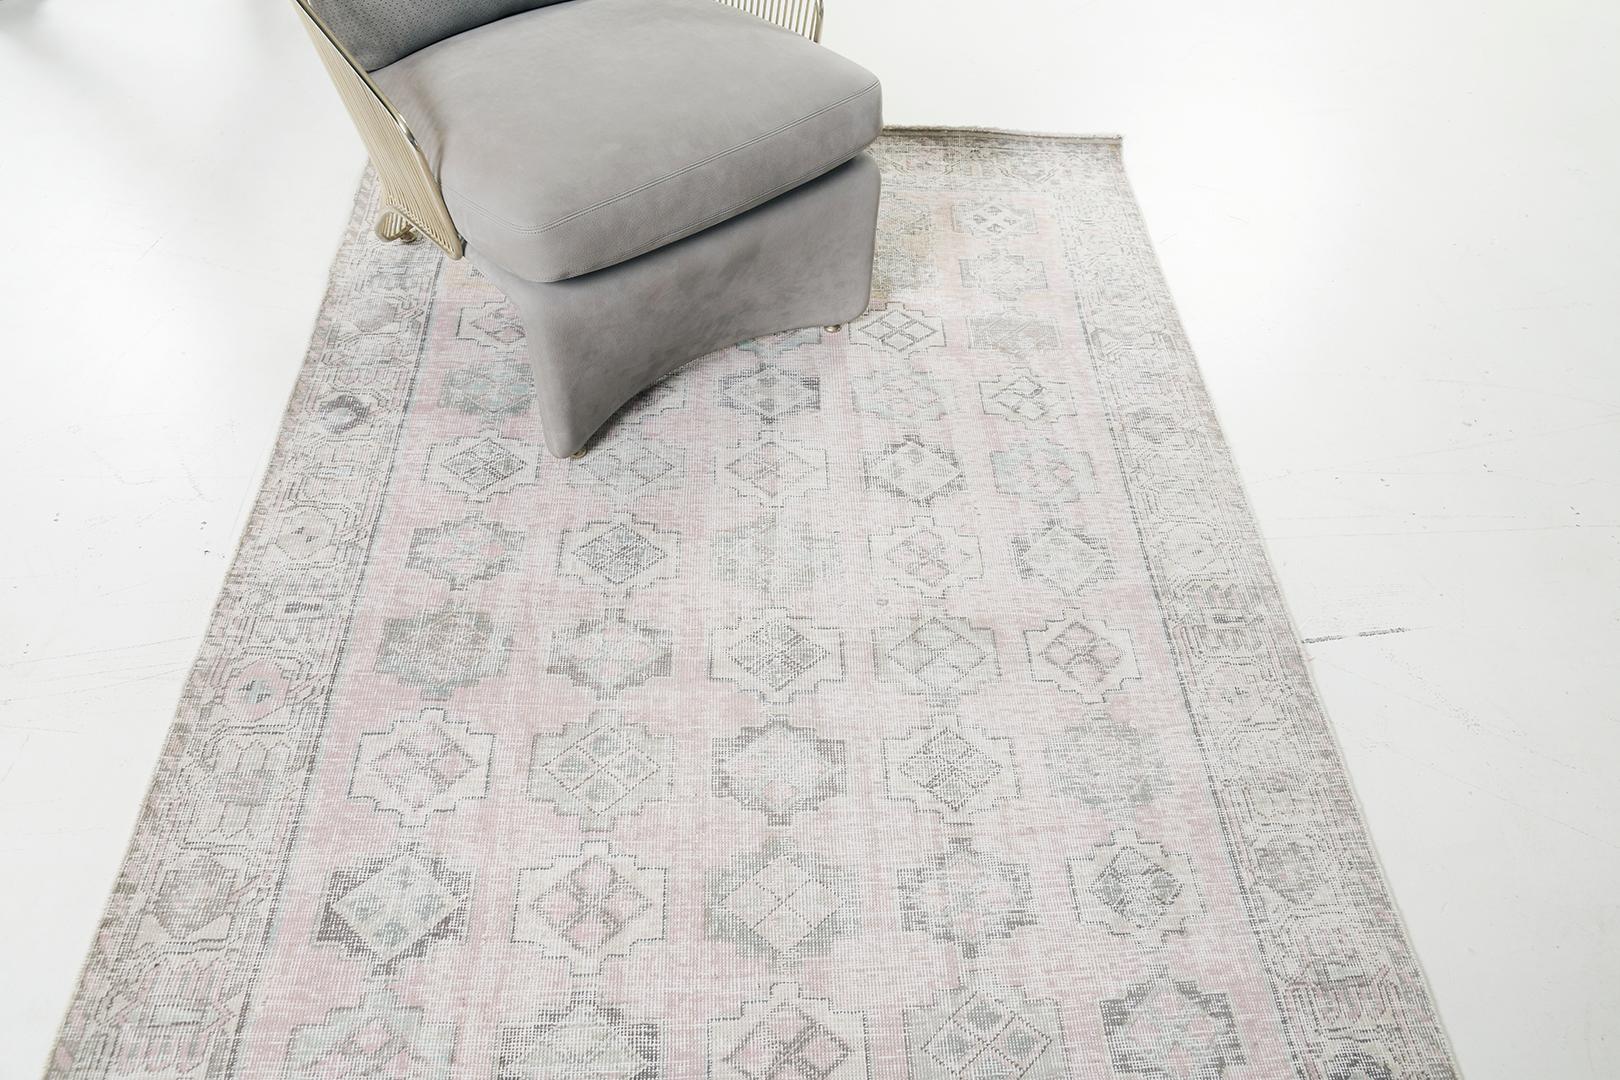 Featuring a mesmerizing collaboration of awe-inspiring colour palette, this Vintage Persian Bakhtiari rug embodies a series of stacked embellished lozenge medallions that leaves a captivating impact. This fascinating Bakhtiari rug is well-suited for